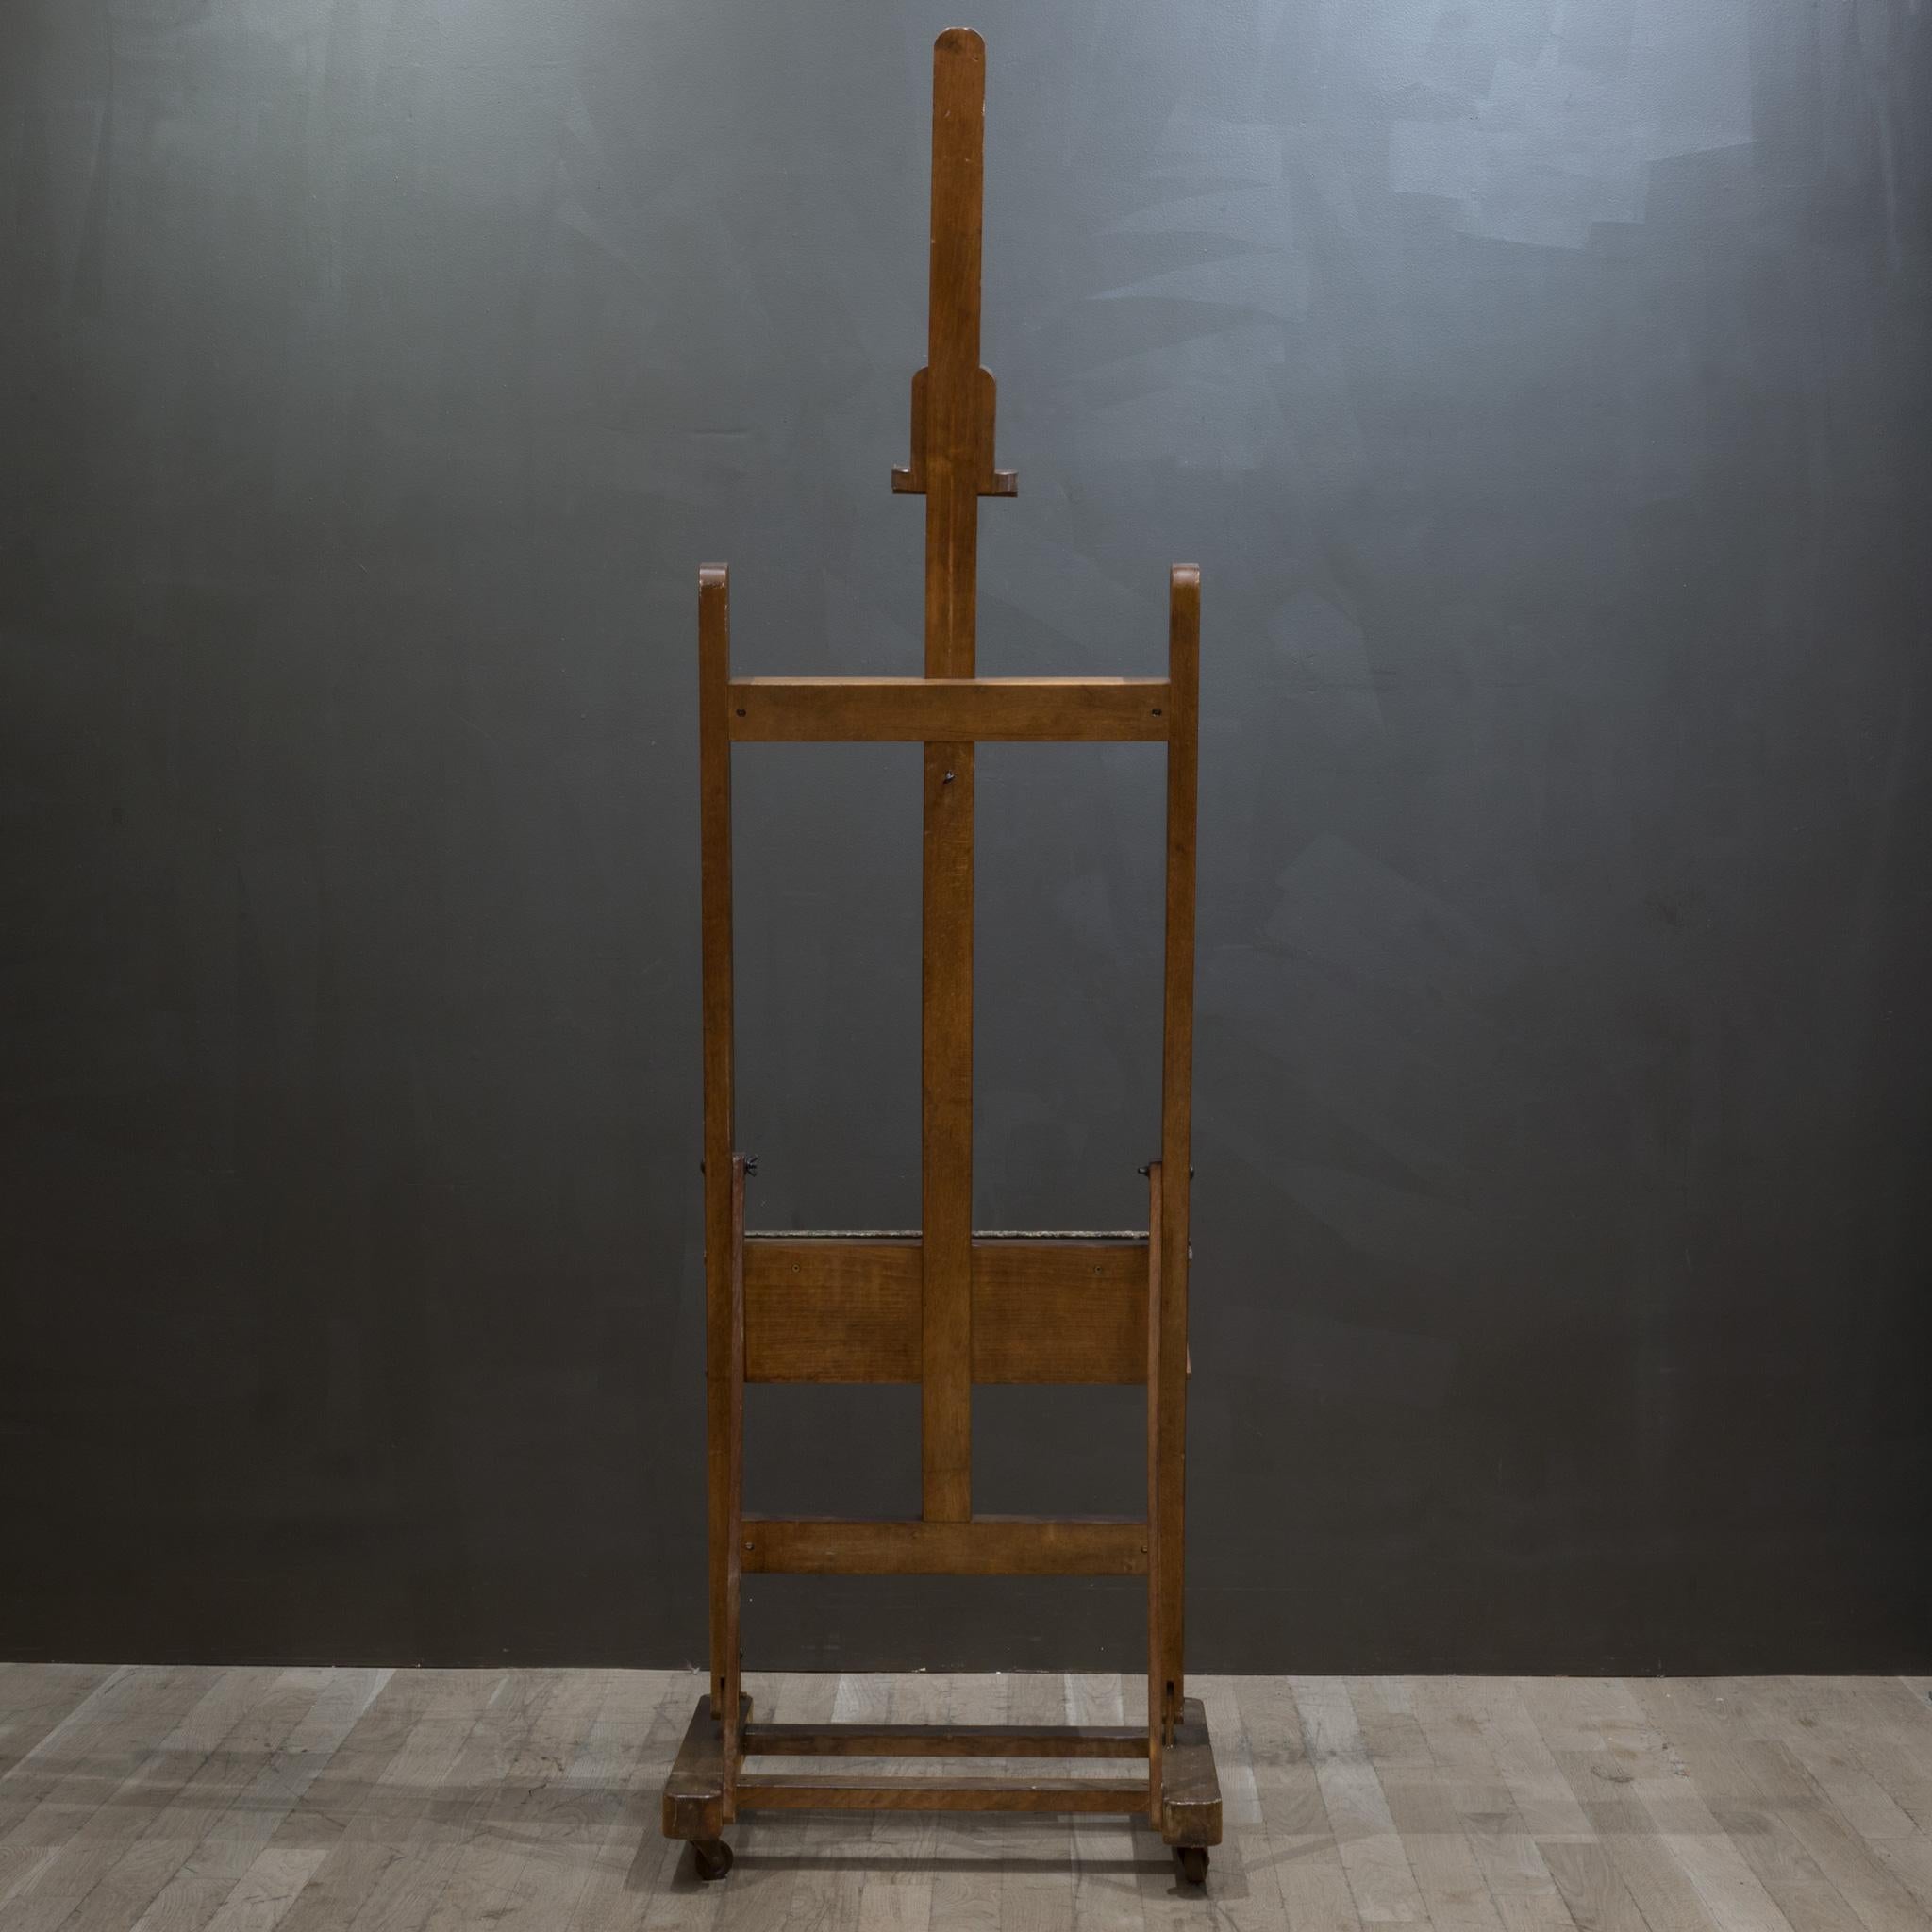 20th Century Early-Mid 20th c. Collapsible Artist's Easel c.1940-1950